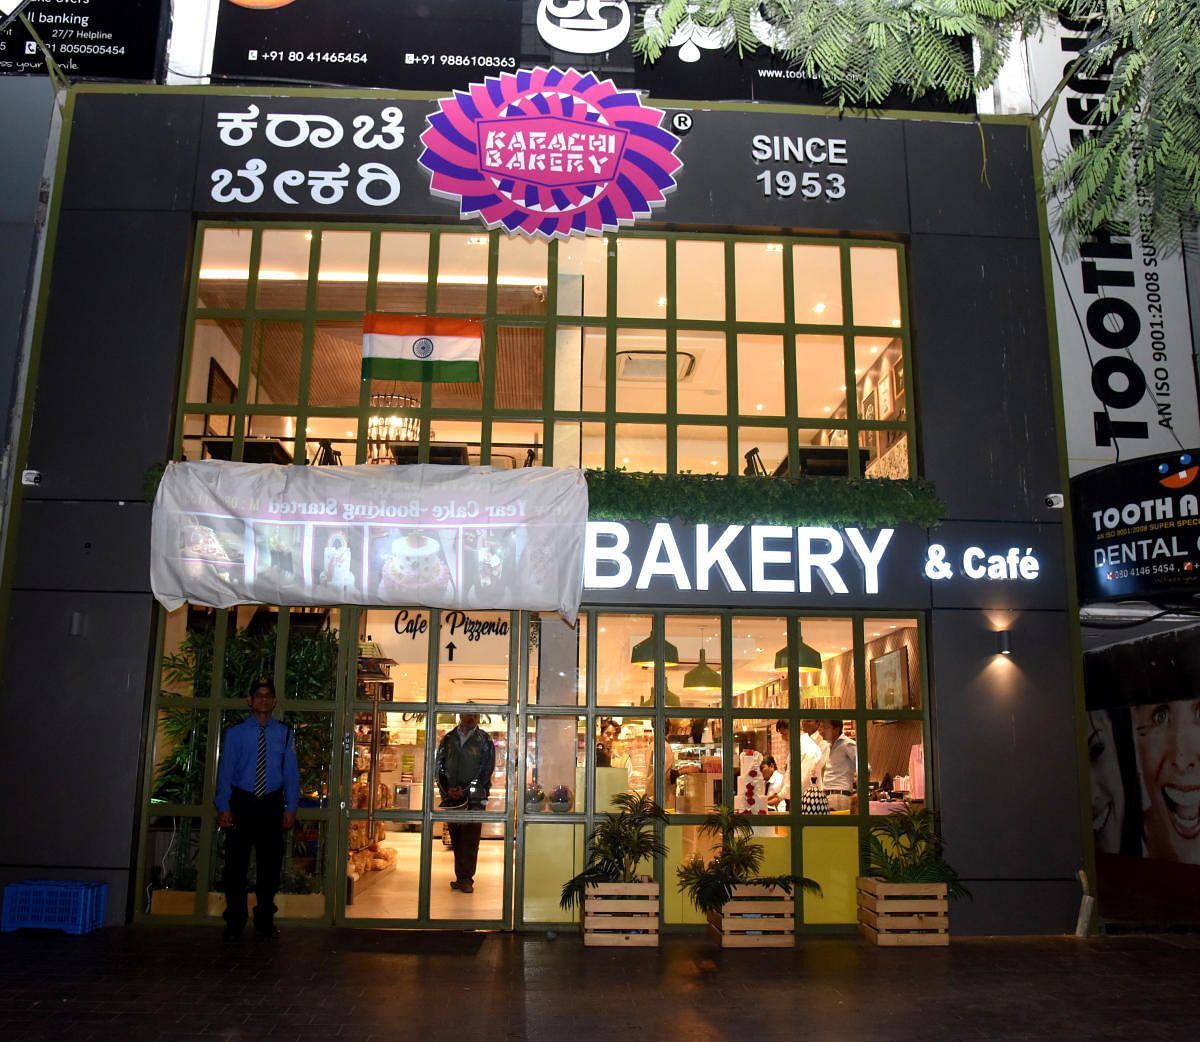 The Karachi Bakery with its board covered at 100 Ft Road, Indiranagar, on Friday. DH Photo/S K Dinesh